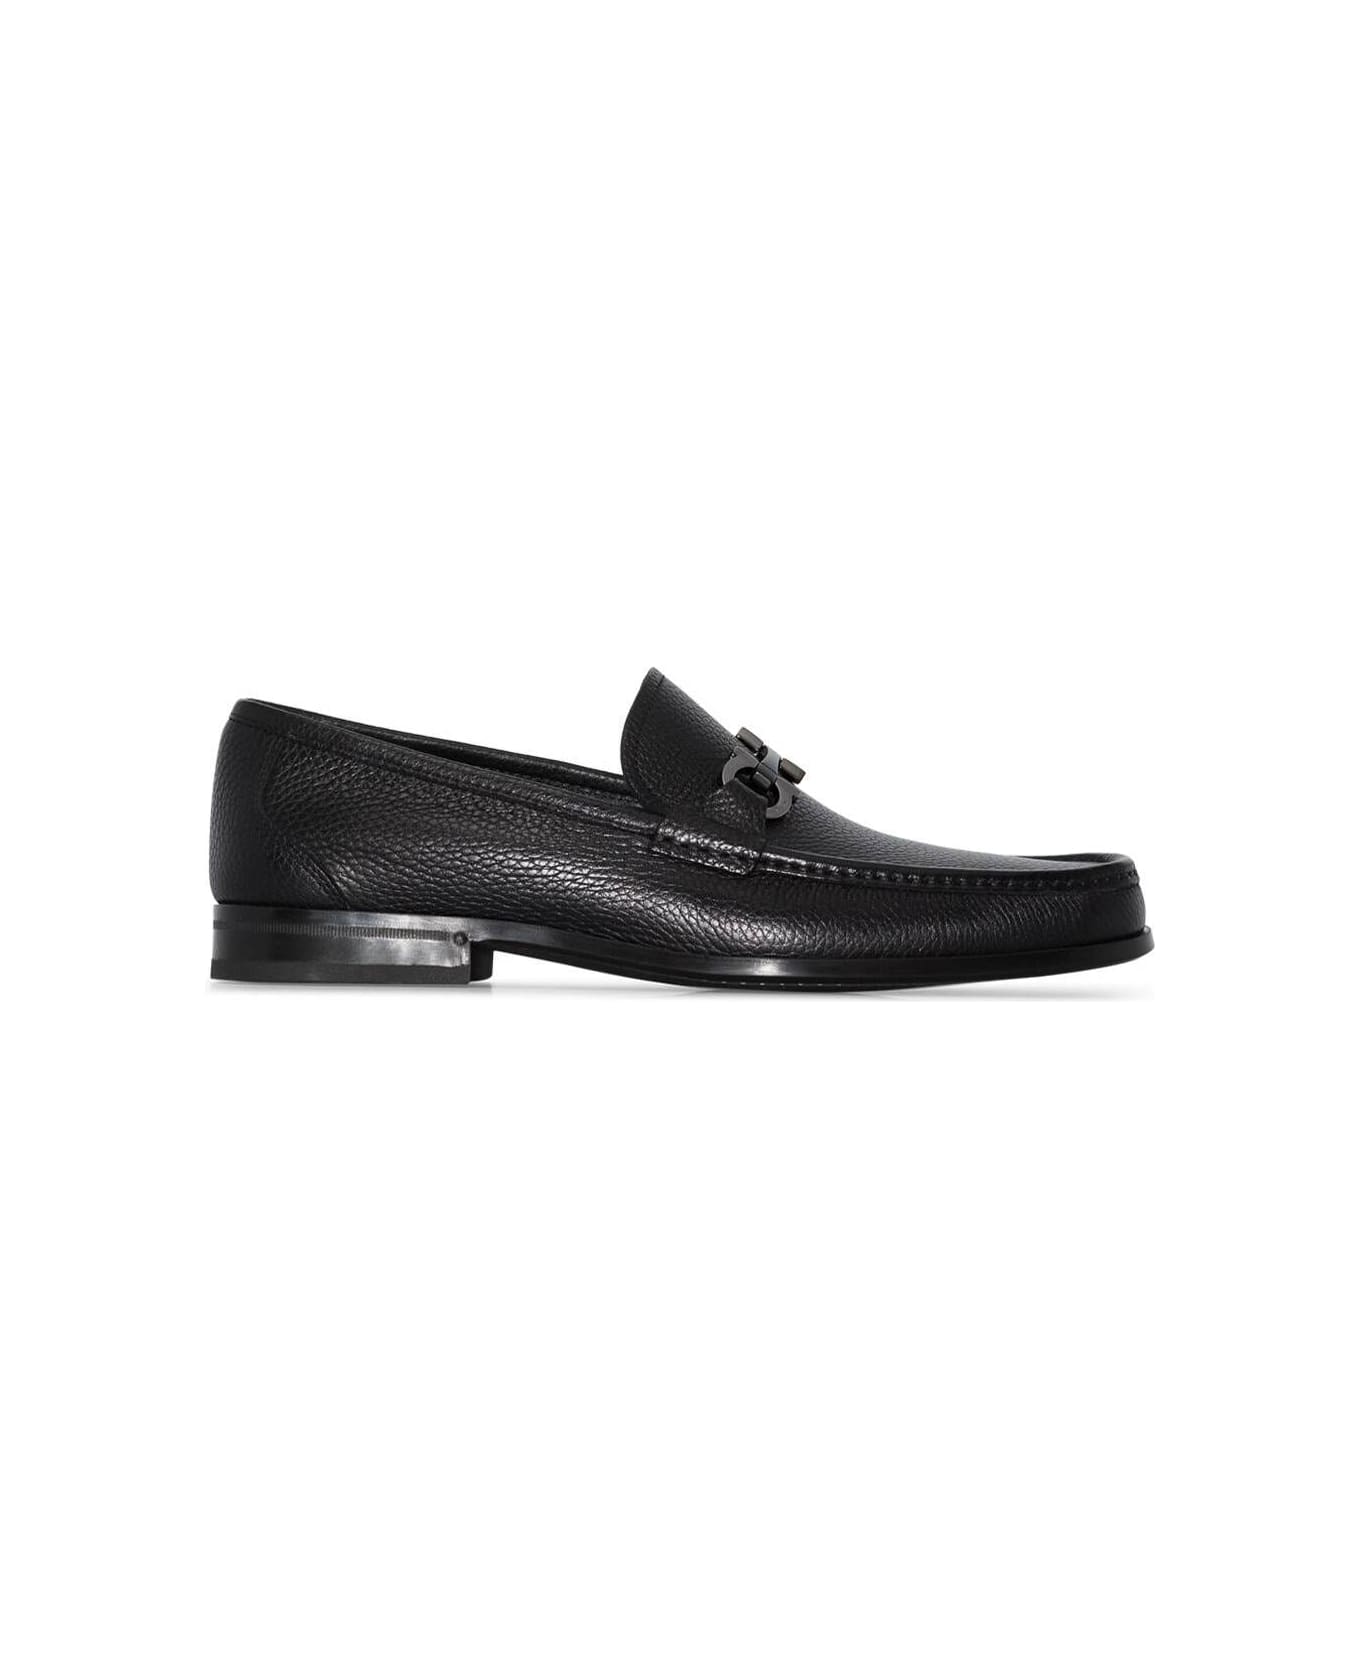 Ferragamo Black Loafers With Tonal Gancini Detail In Hammered Leather Man - Black